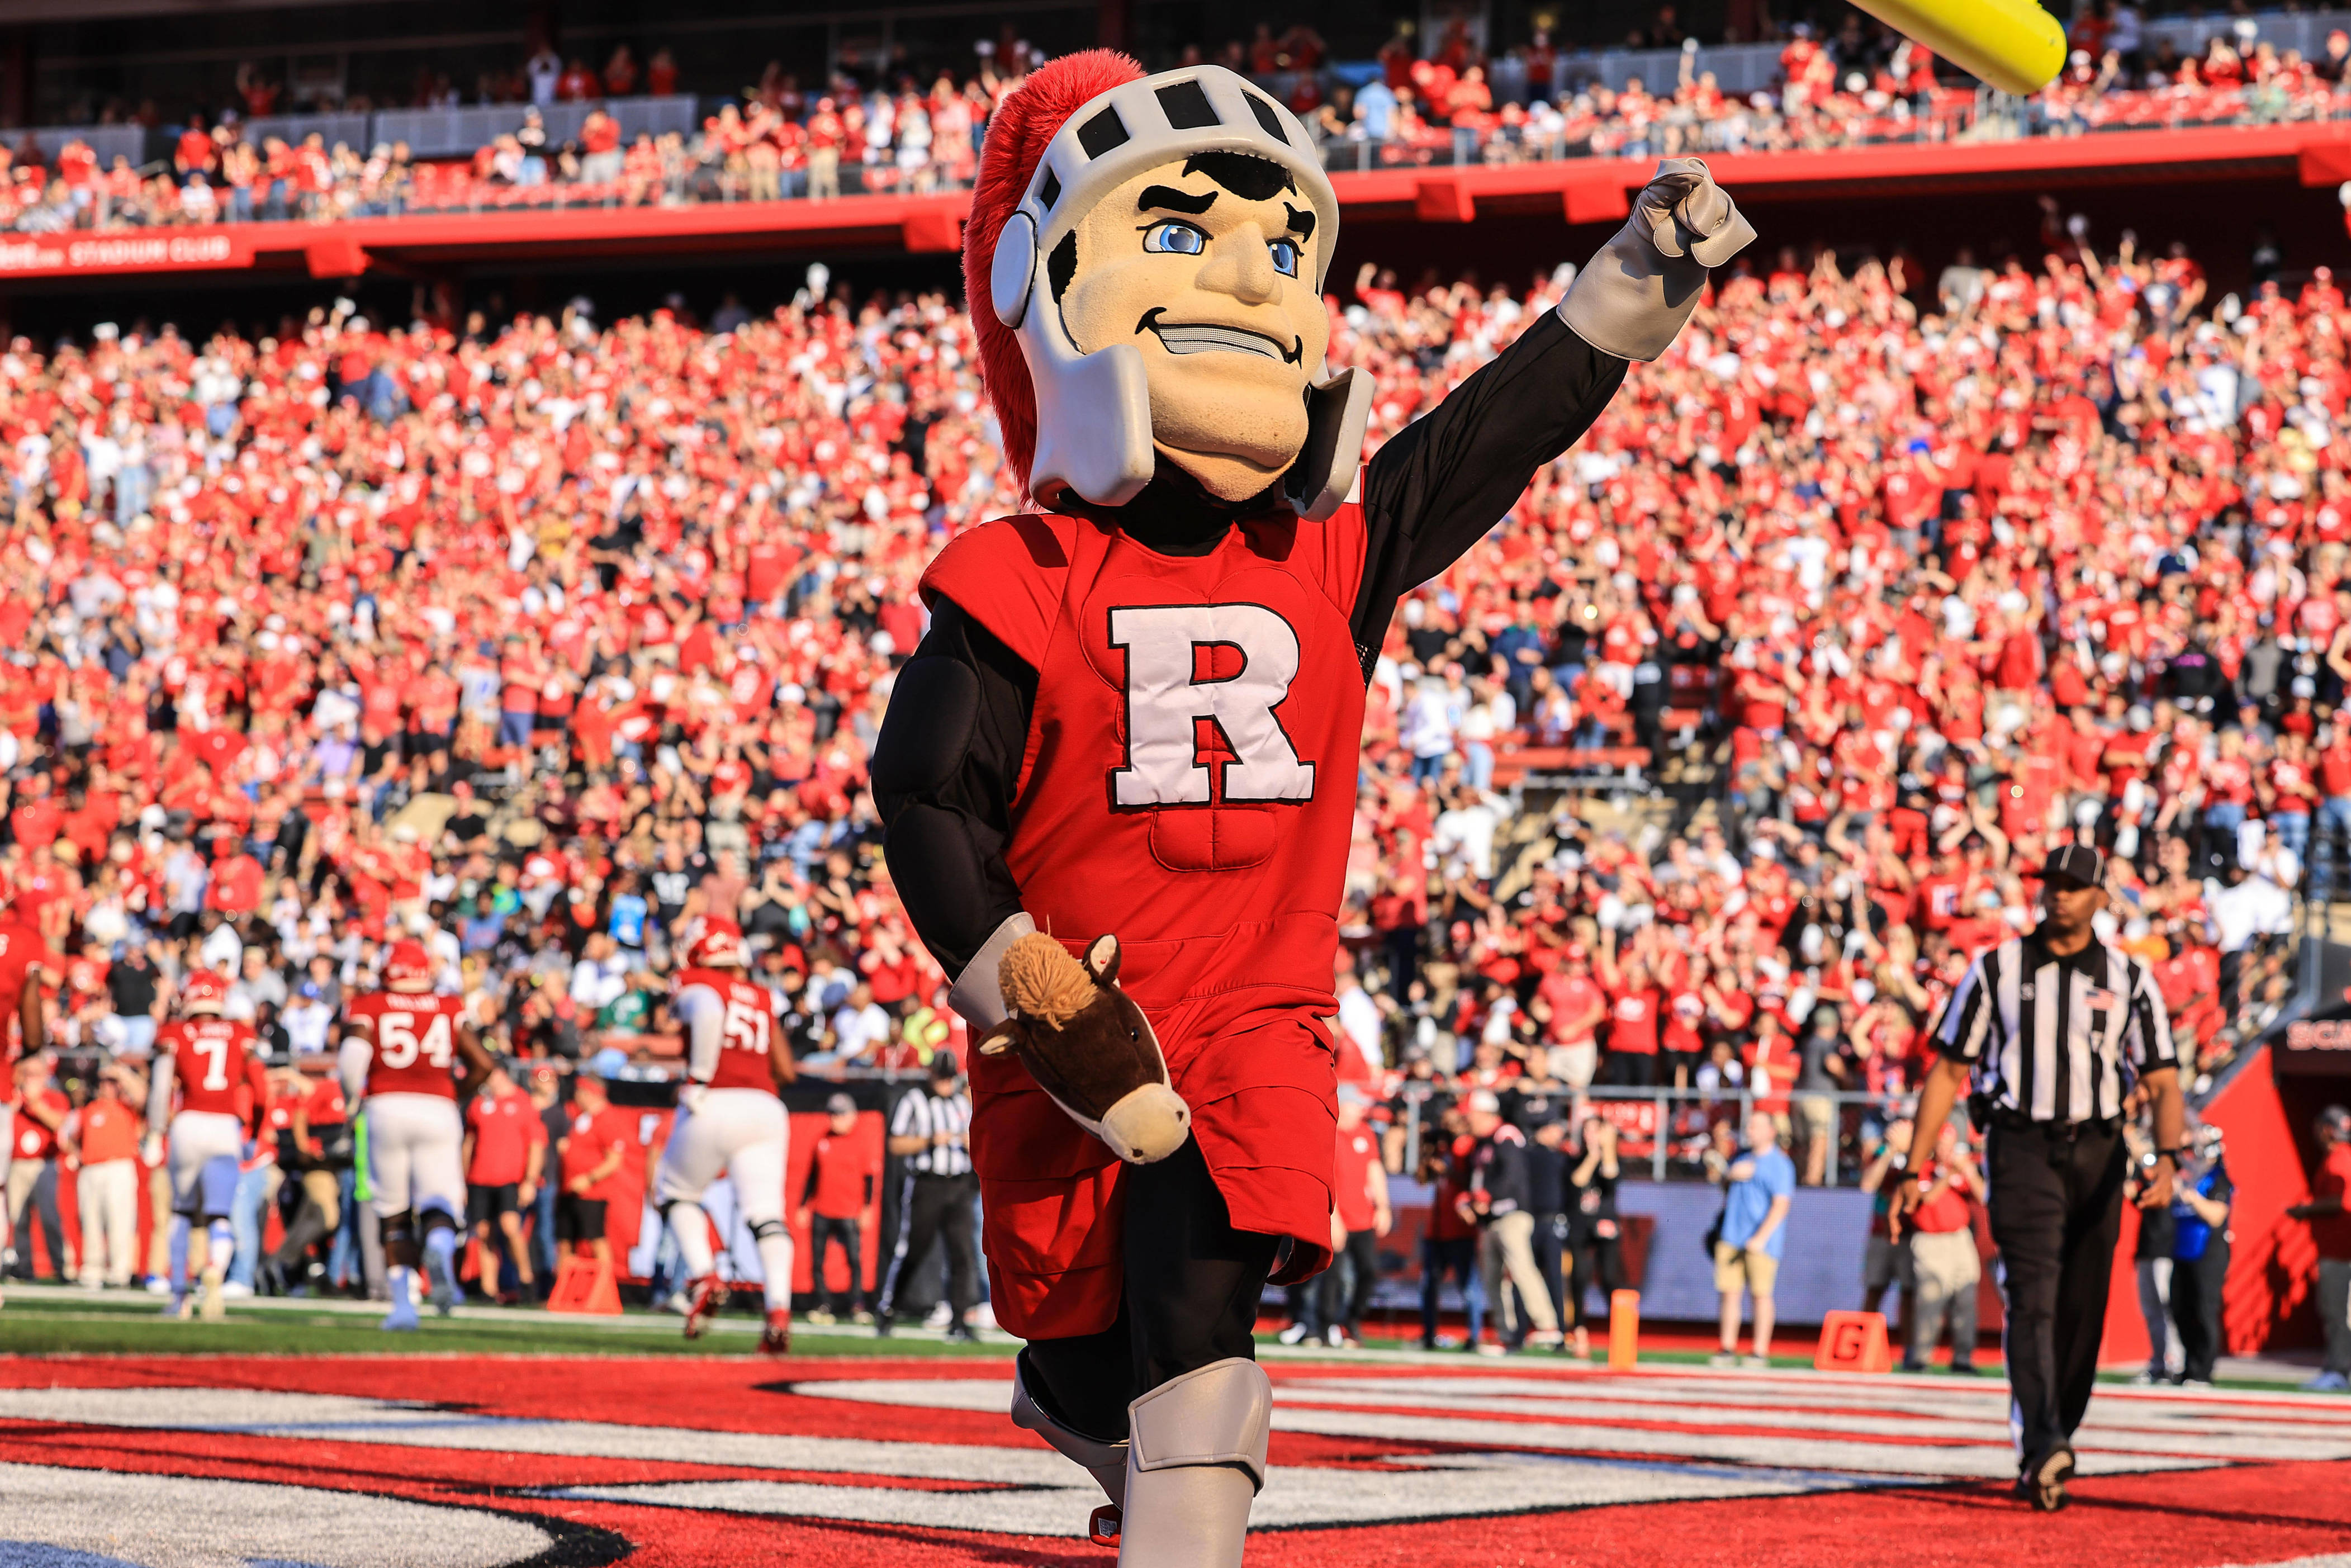 Rutgers football will host Virginia Tech in the Scarlet Out/R Community